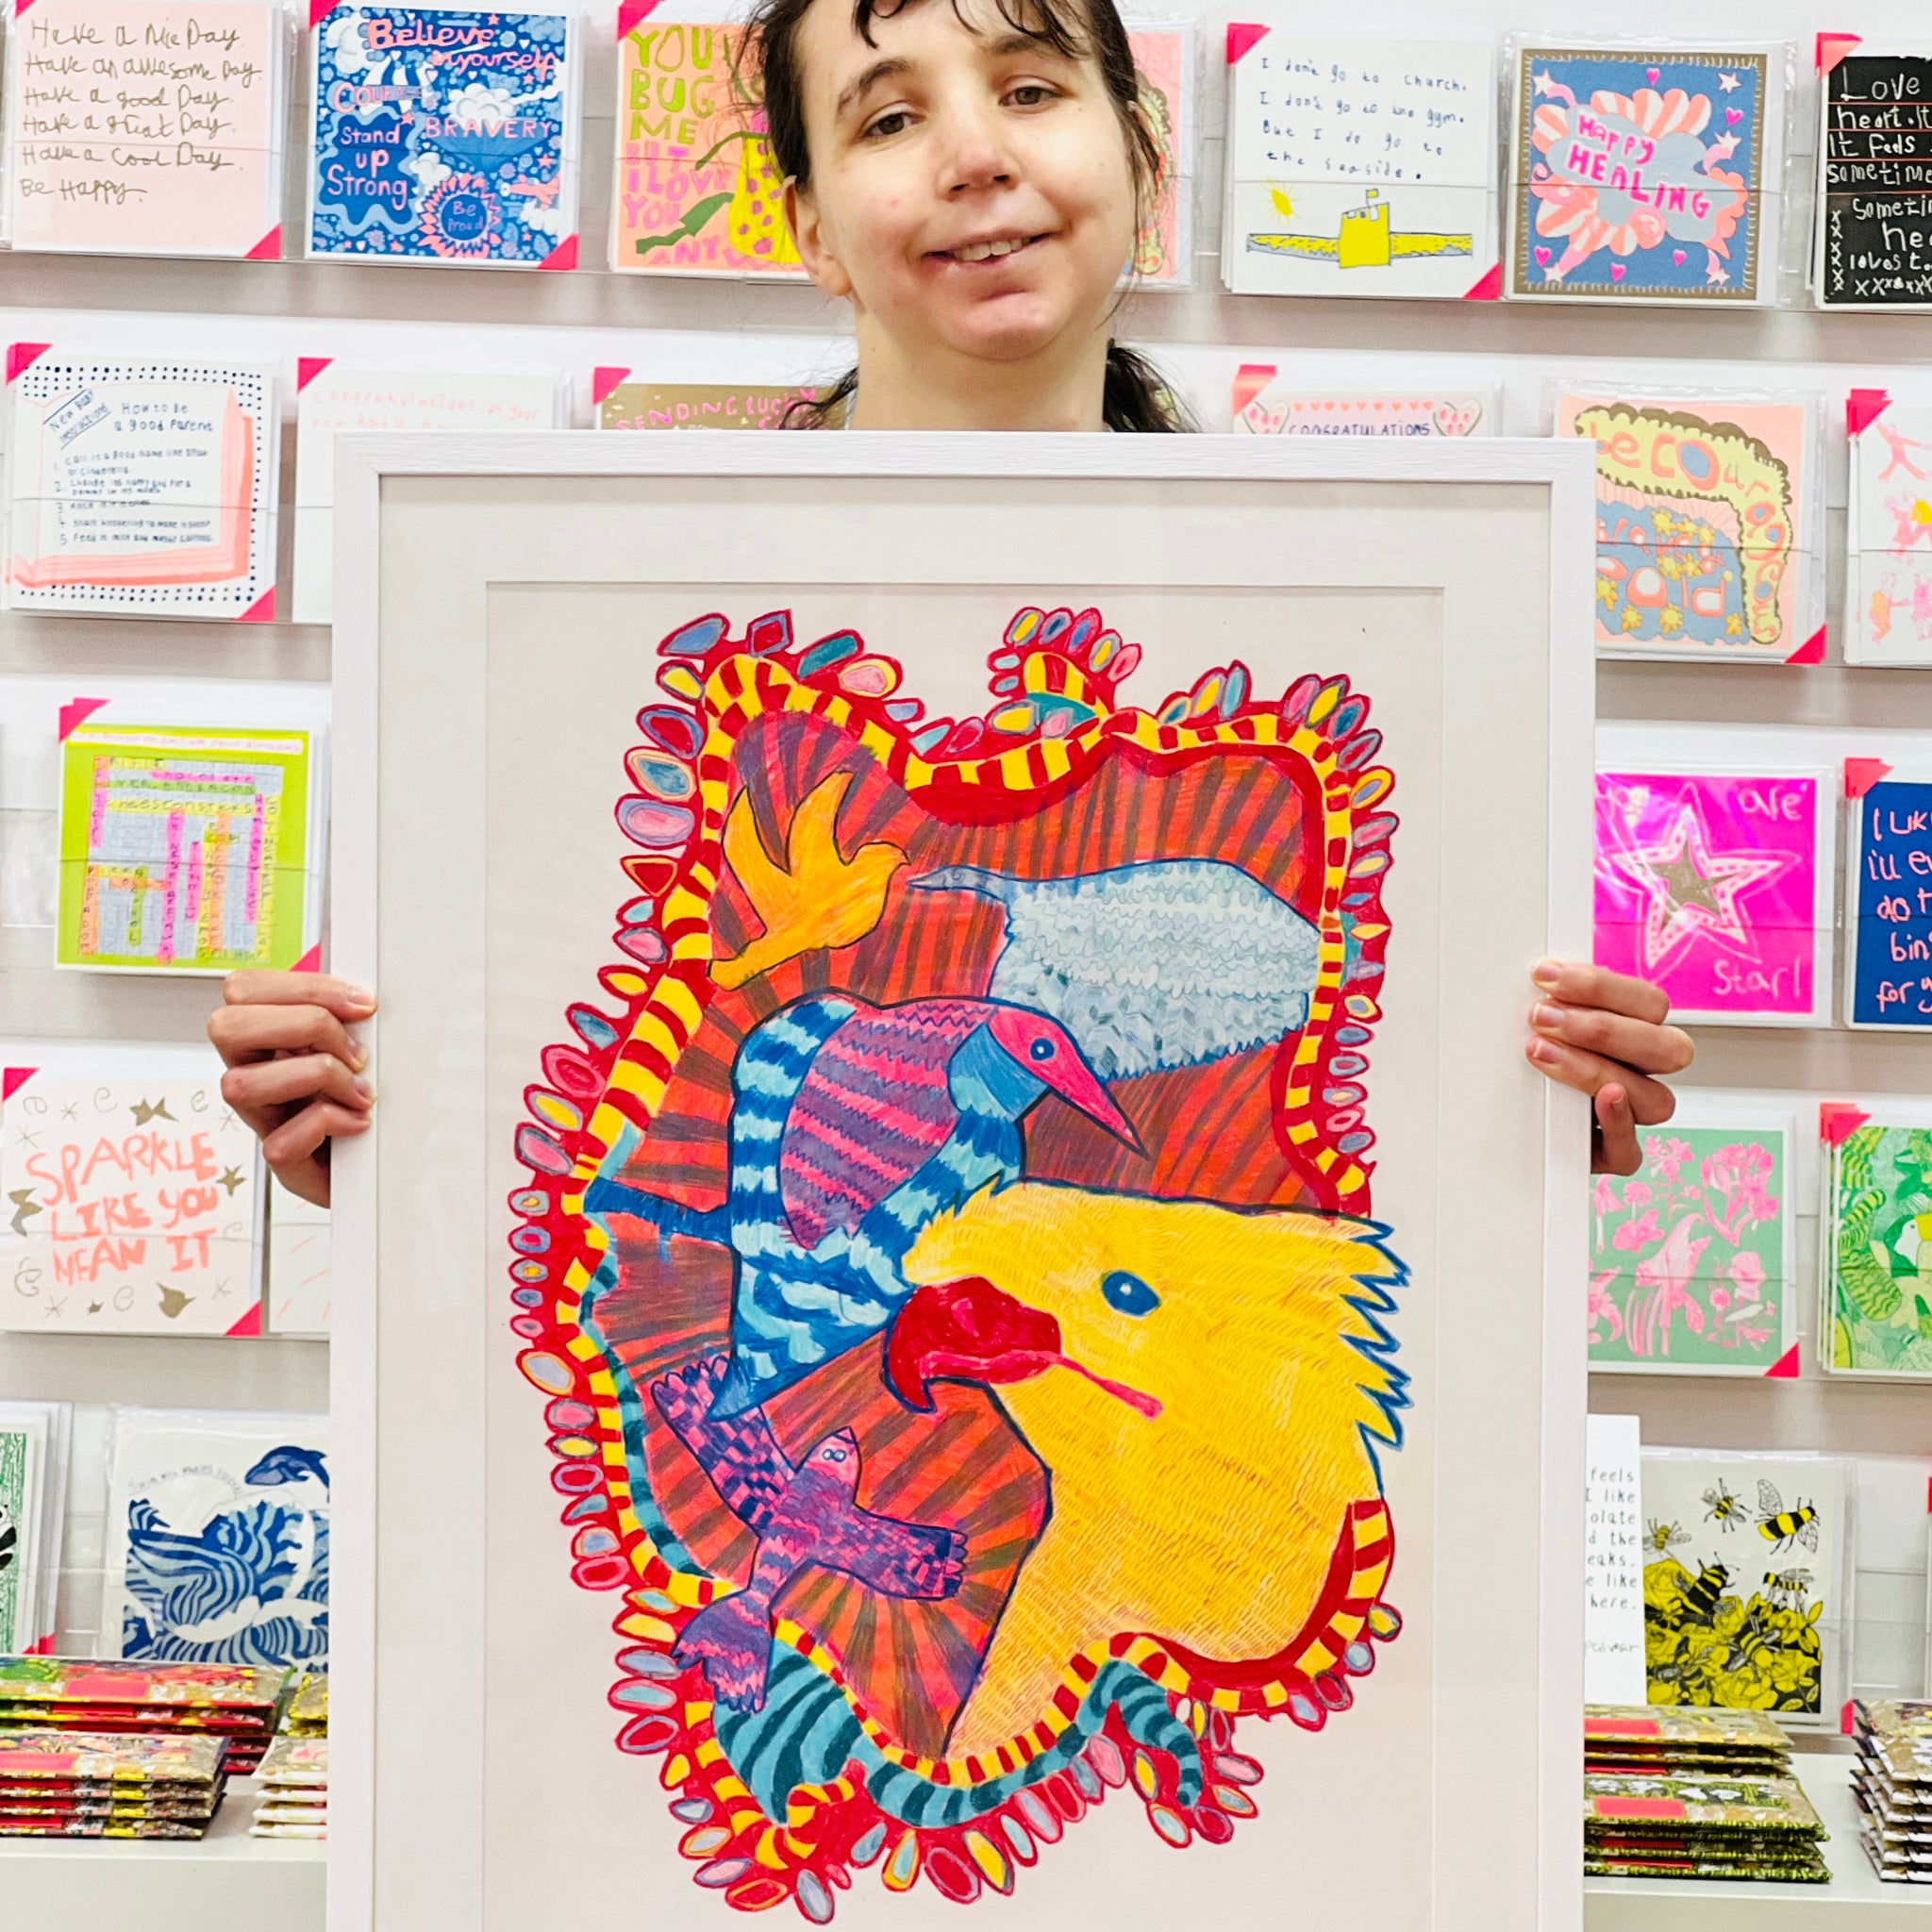 Female artist holding Framed painting of blue, pink and yellow birds 